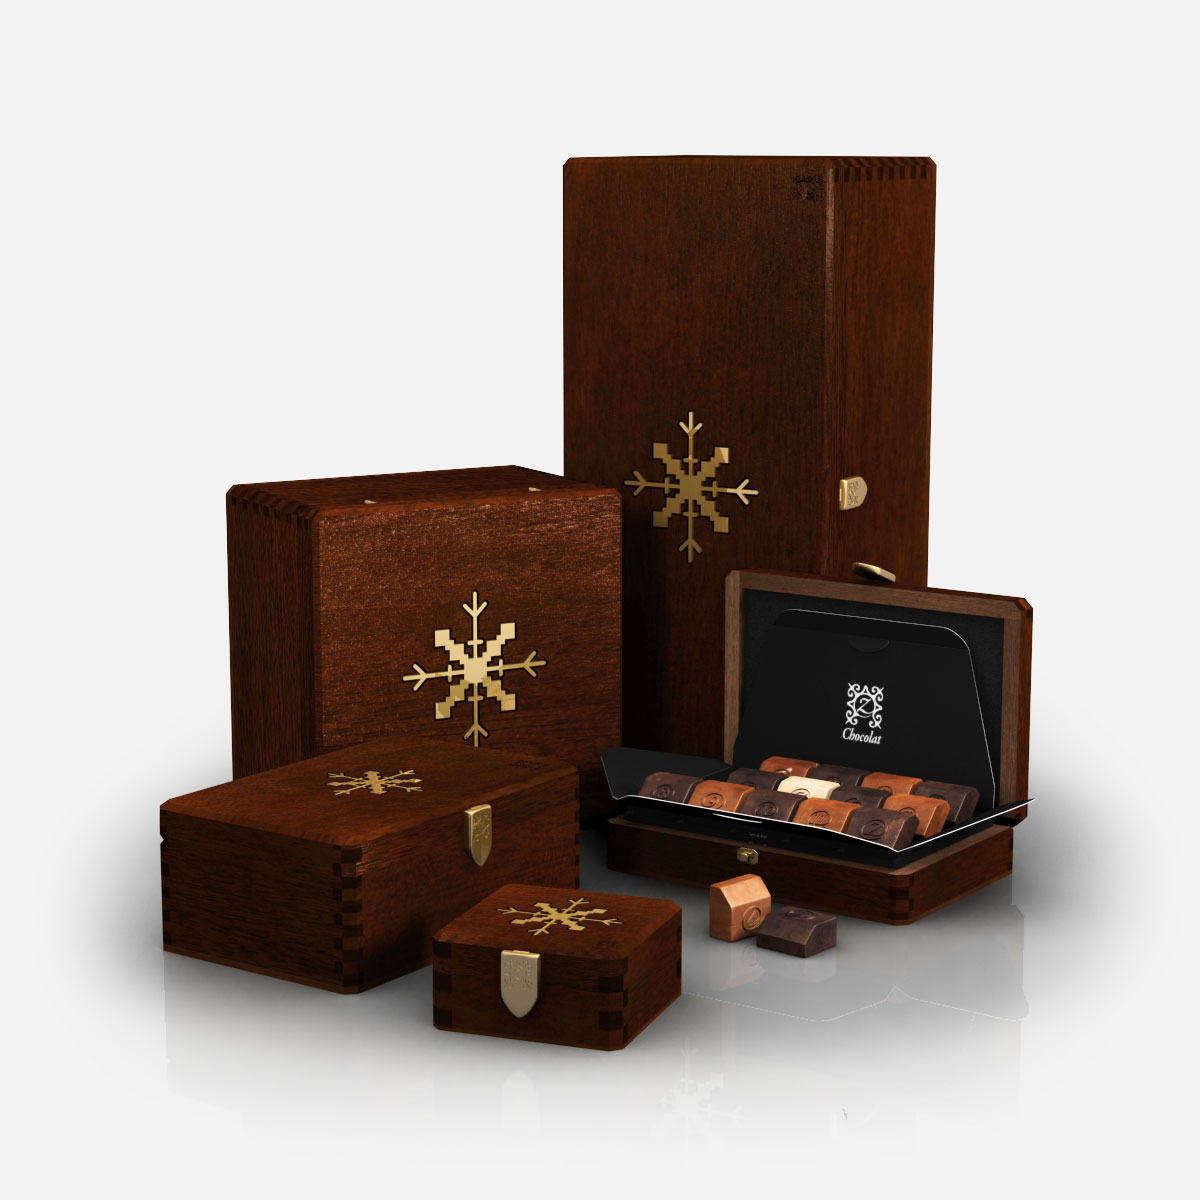 Mahogany Holiday Collection: “Excellence”